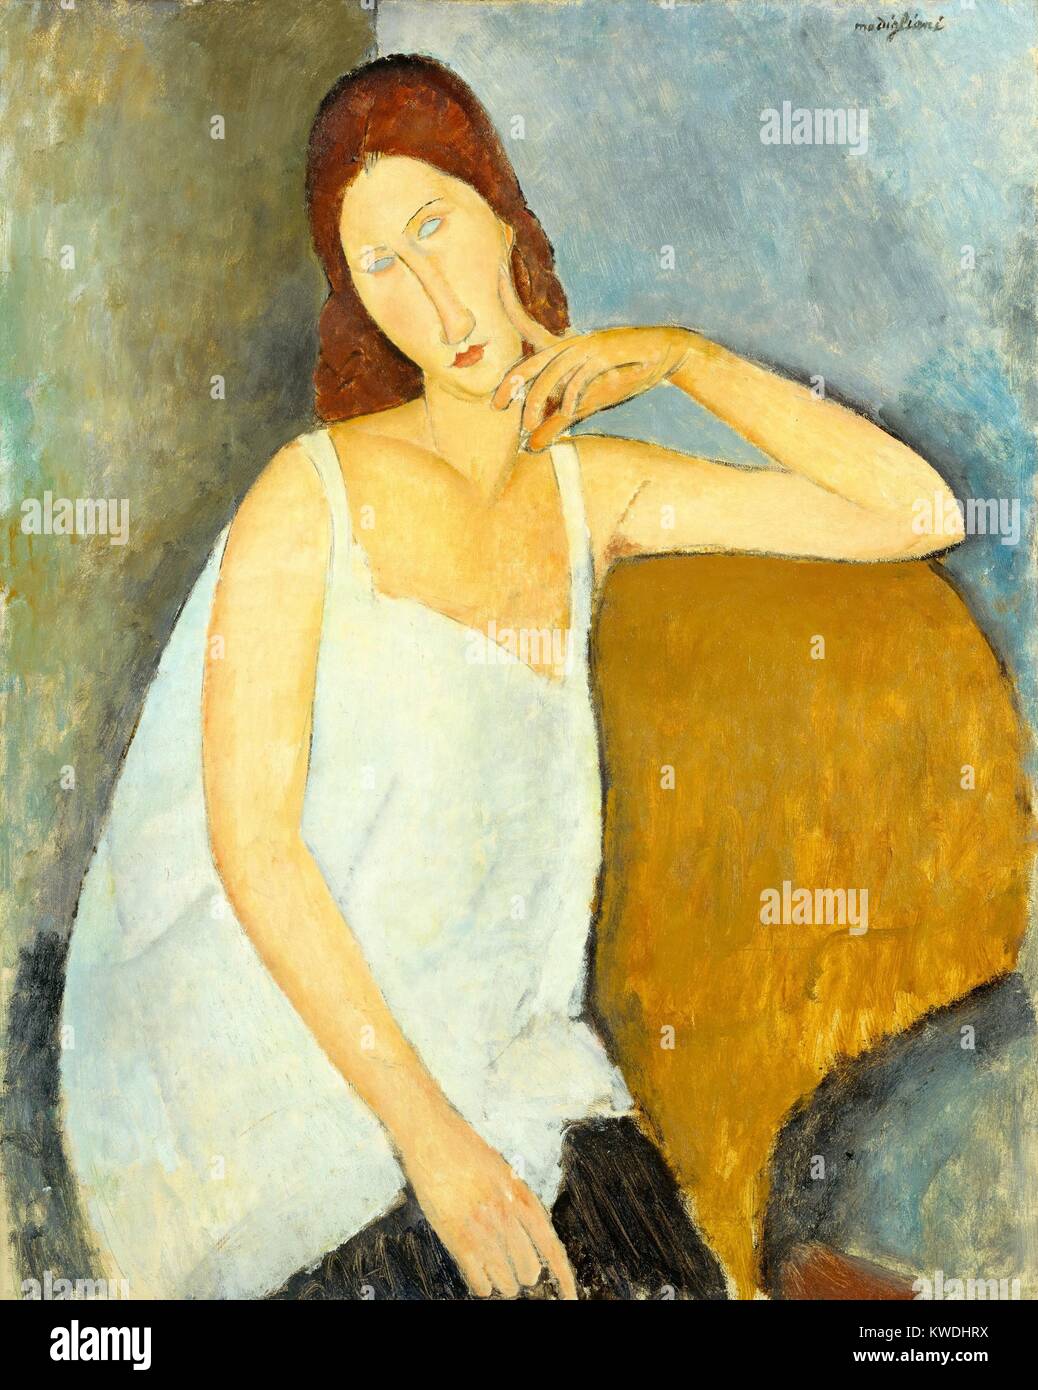 JEANNE HEBUTERNE, by Amedeo Modigliani, 1919, Italian modernist painting, oil on canvas. Hebuterne, the artists 21 year old mistress, was pregnant with their second child. This portrait is painted with Modigliani stylizations and elongations (BSLOC 2017 7 16) Stock Photo